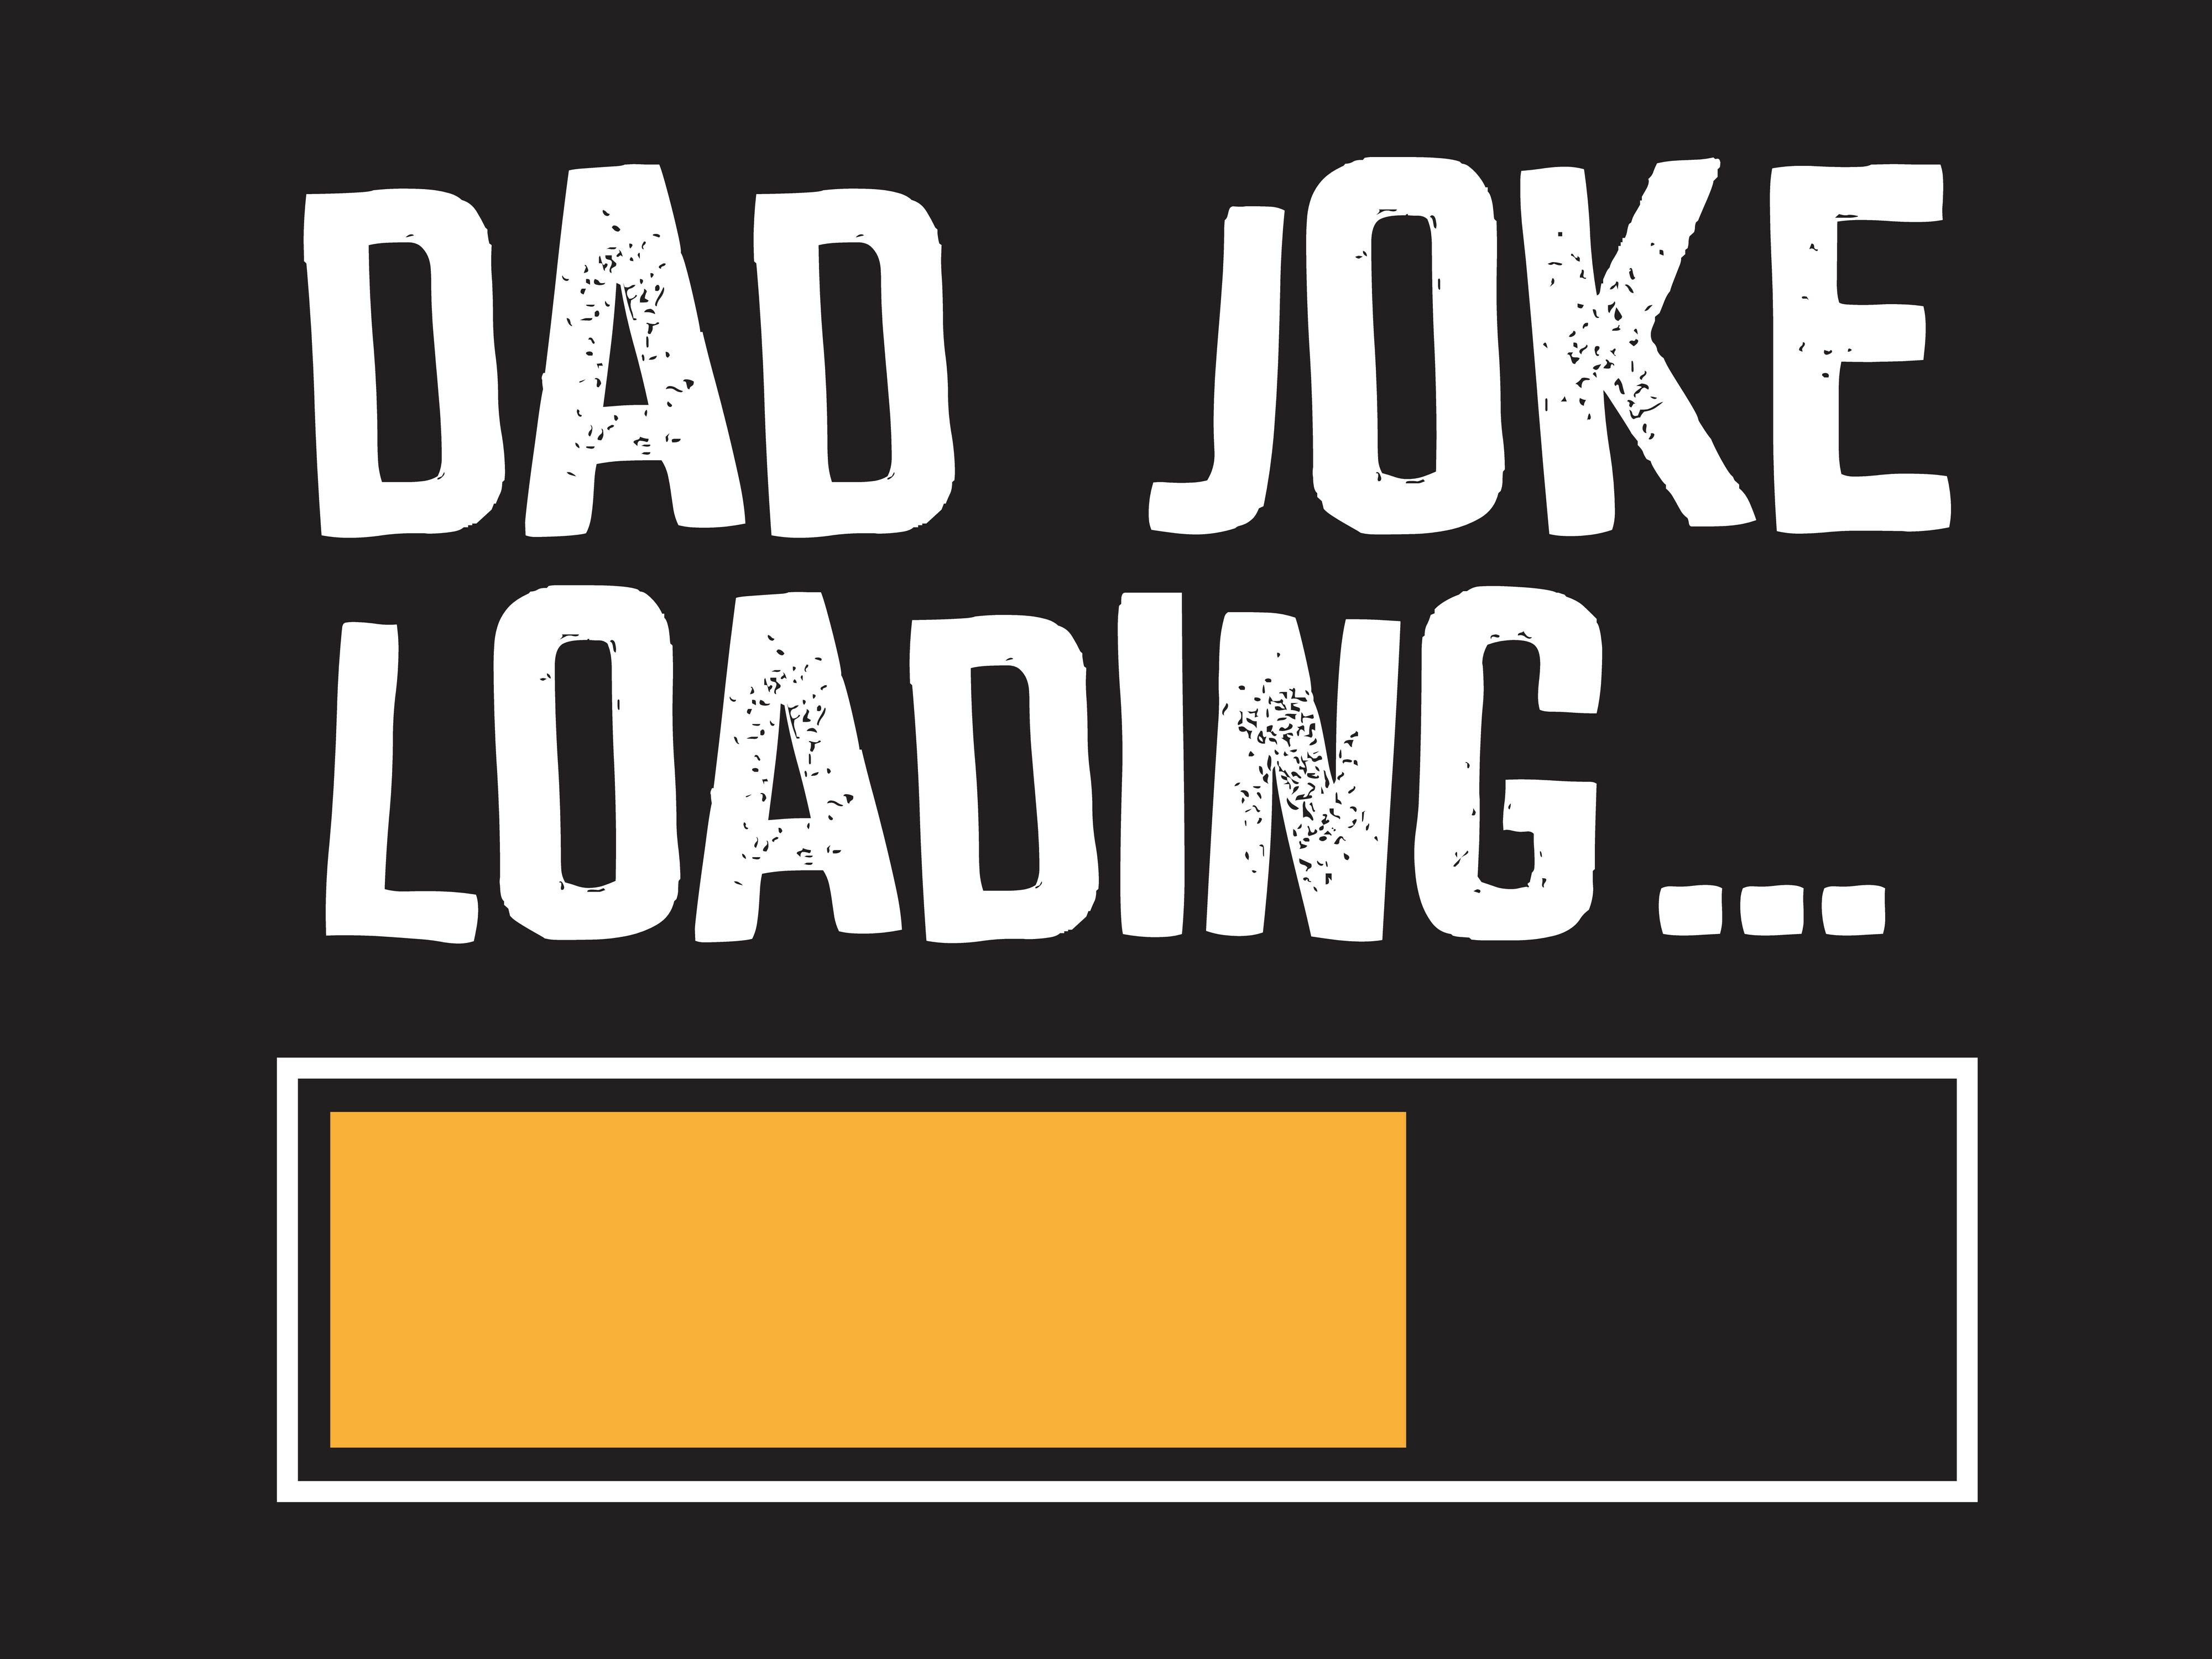 For Fathers Day, Best Dad-Vice, Best/Worst Dad Jokes!